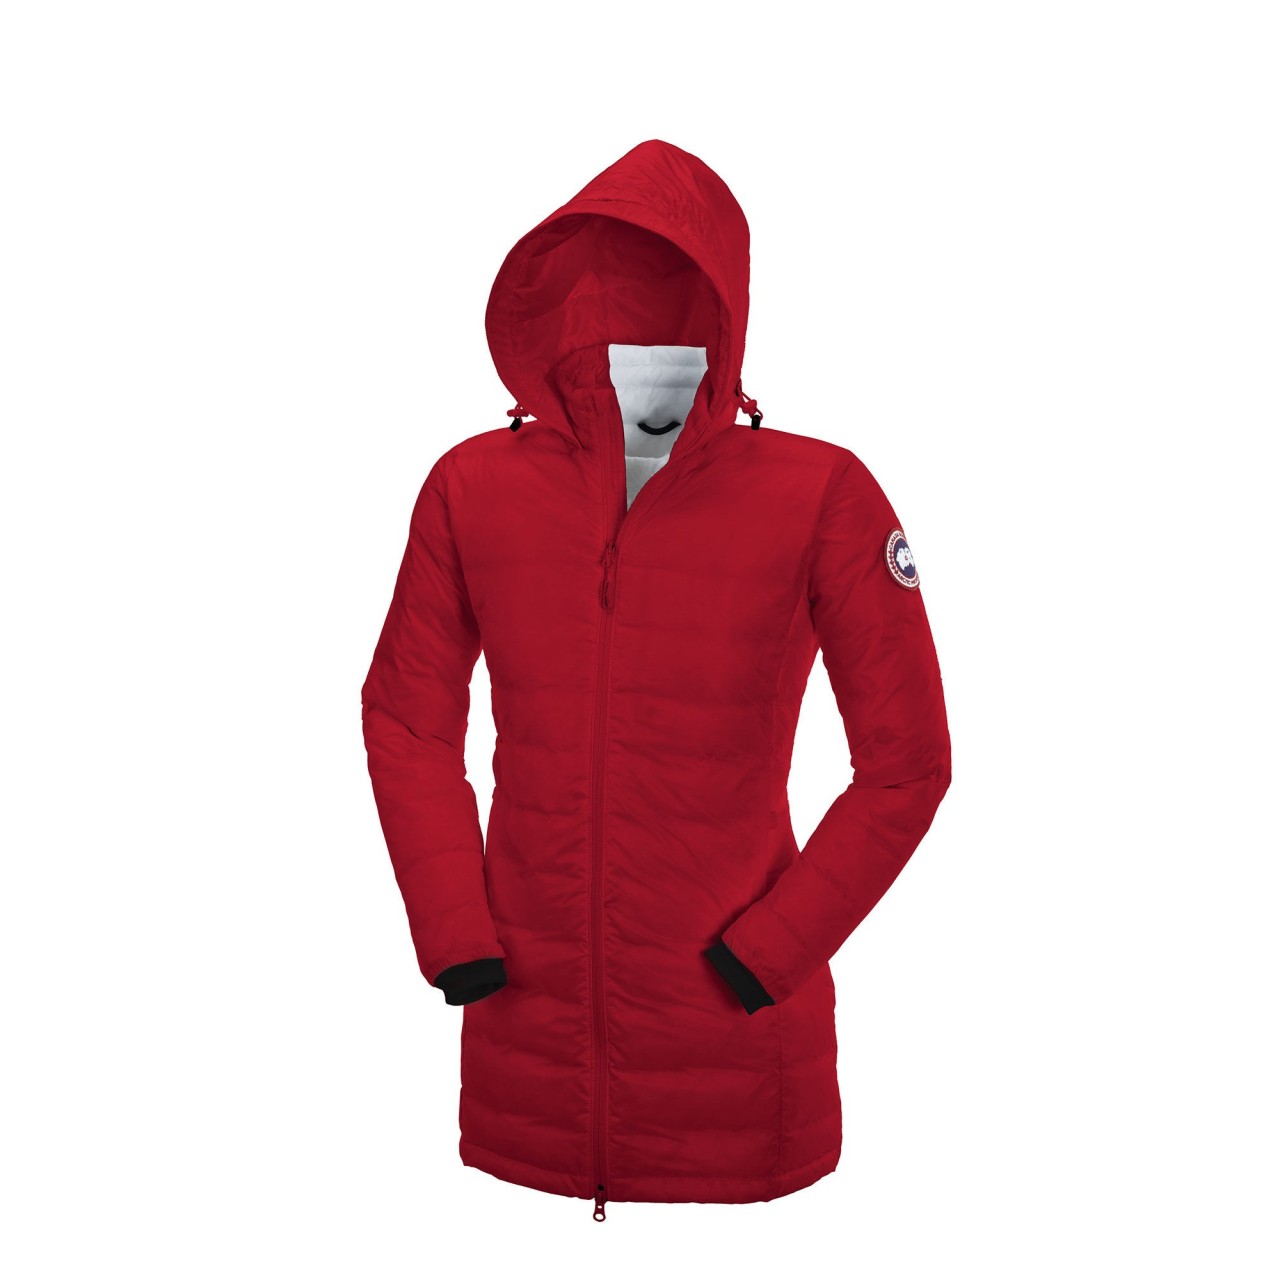 Canada Goose chateau parka online store - 70% Off Cheap Canada Goose Jackets Sale